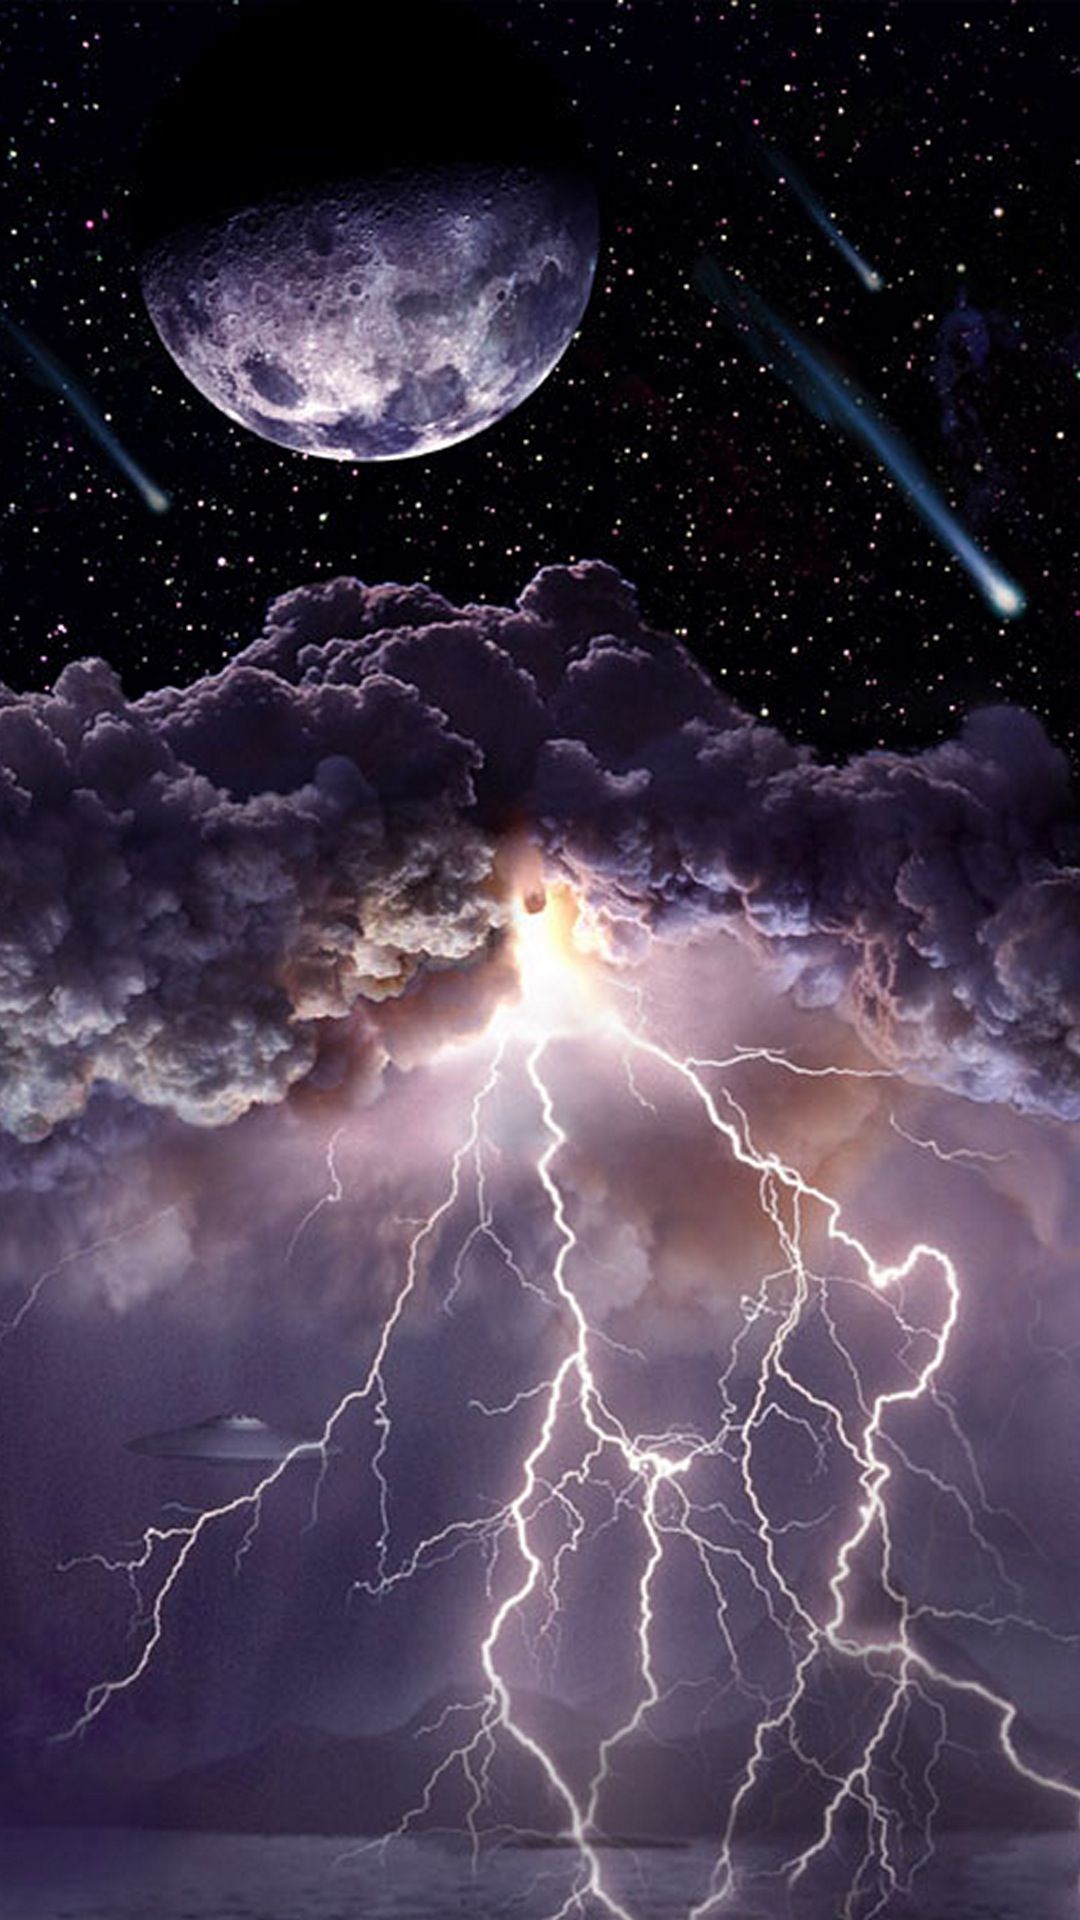 Moon Asteroids Storm Clouds Lightning iPhone 6 Plus HD Wallpaper